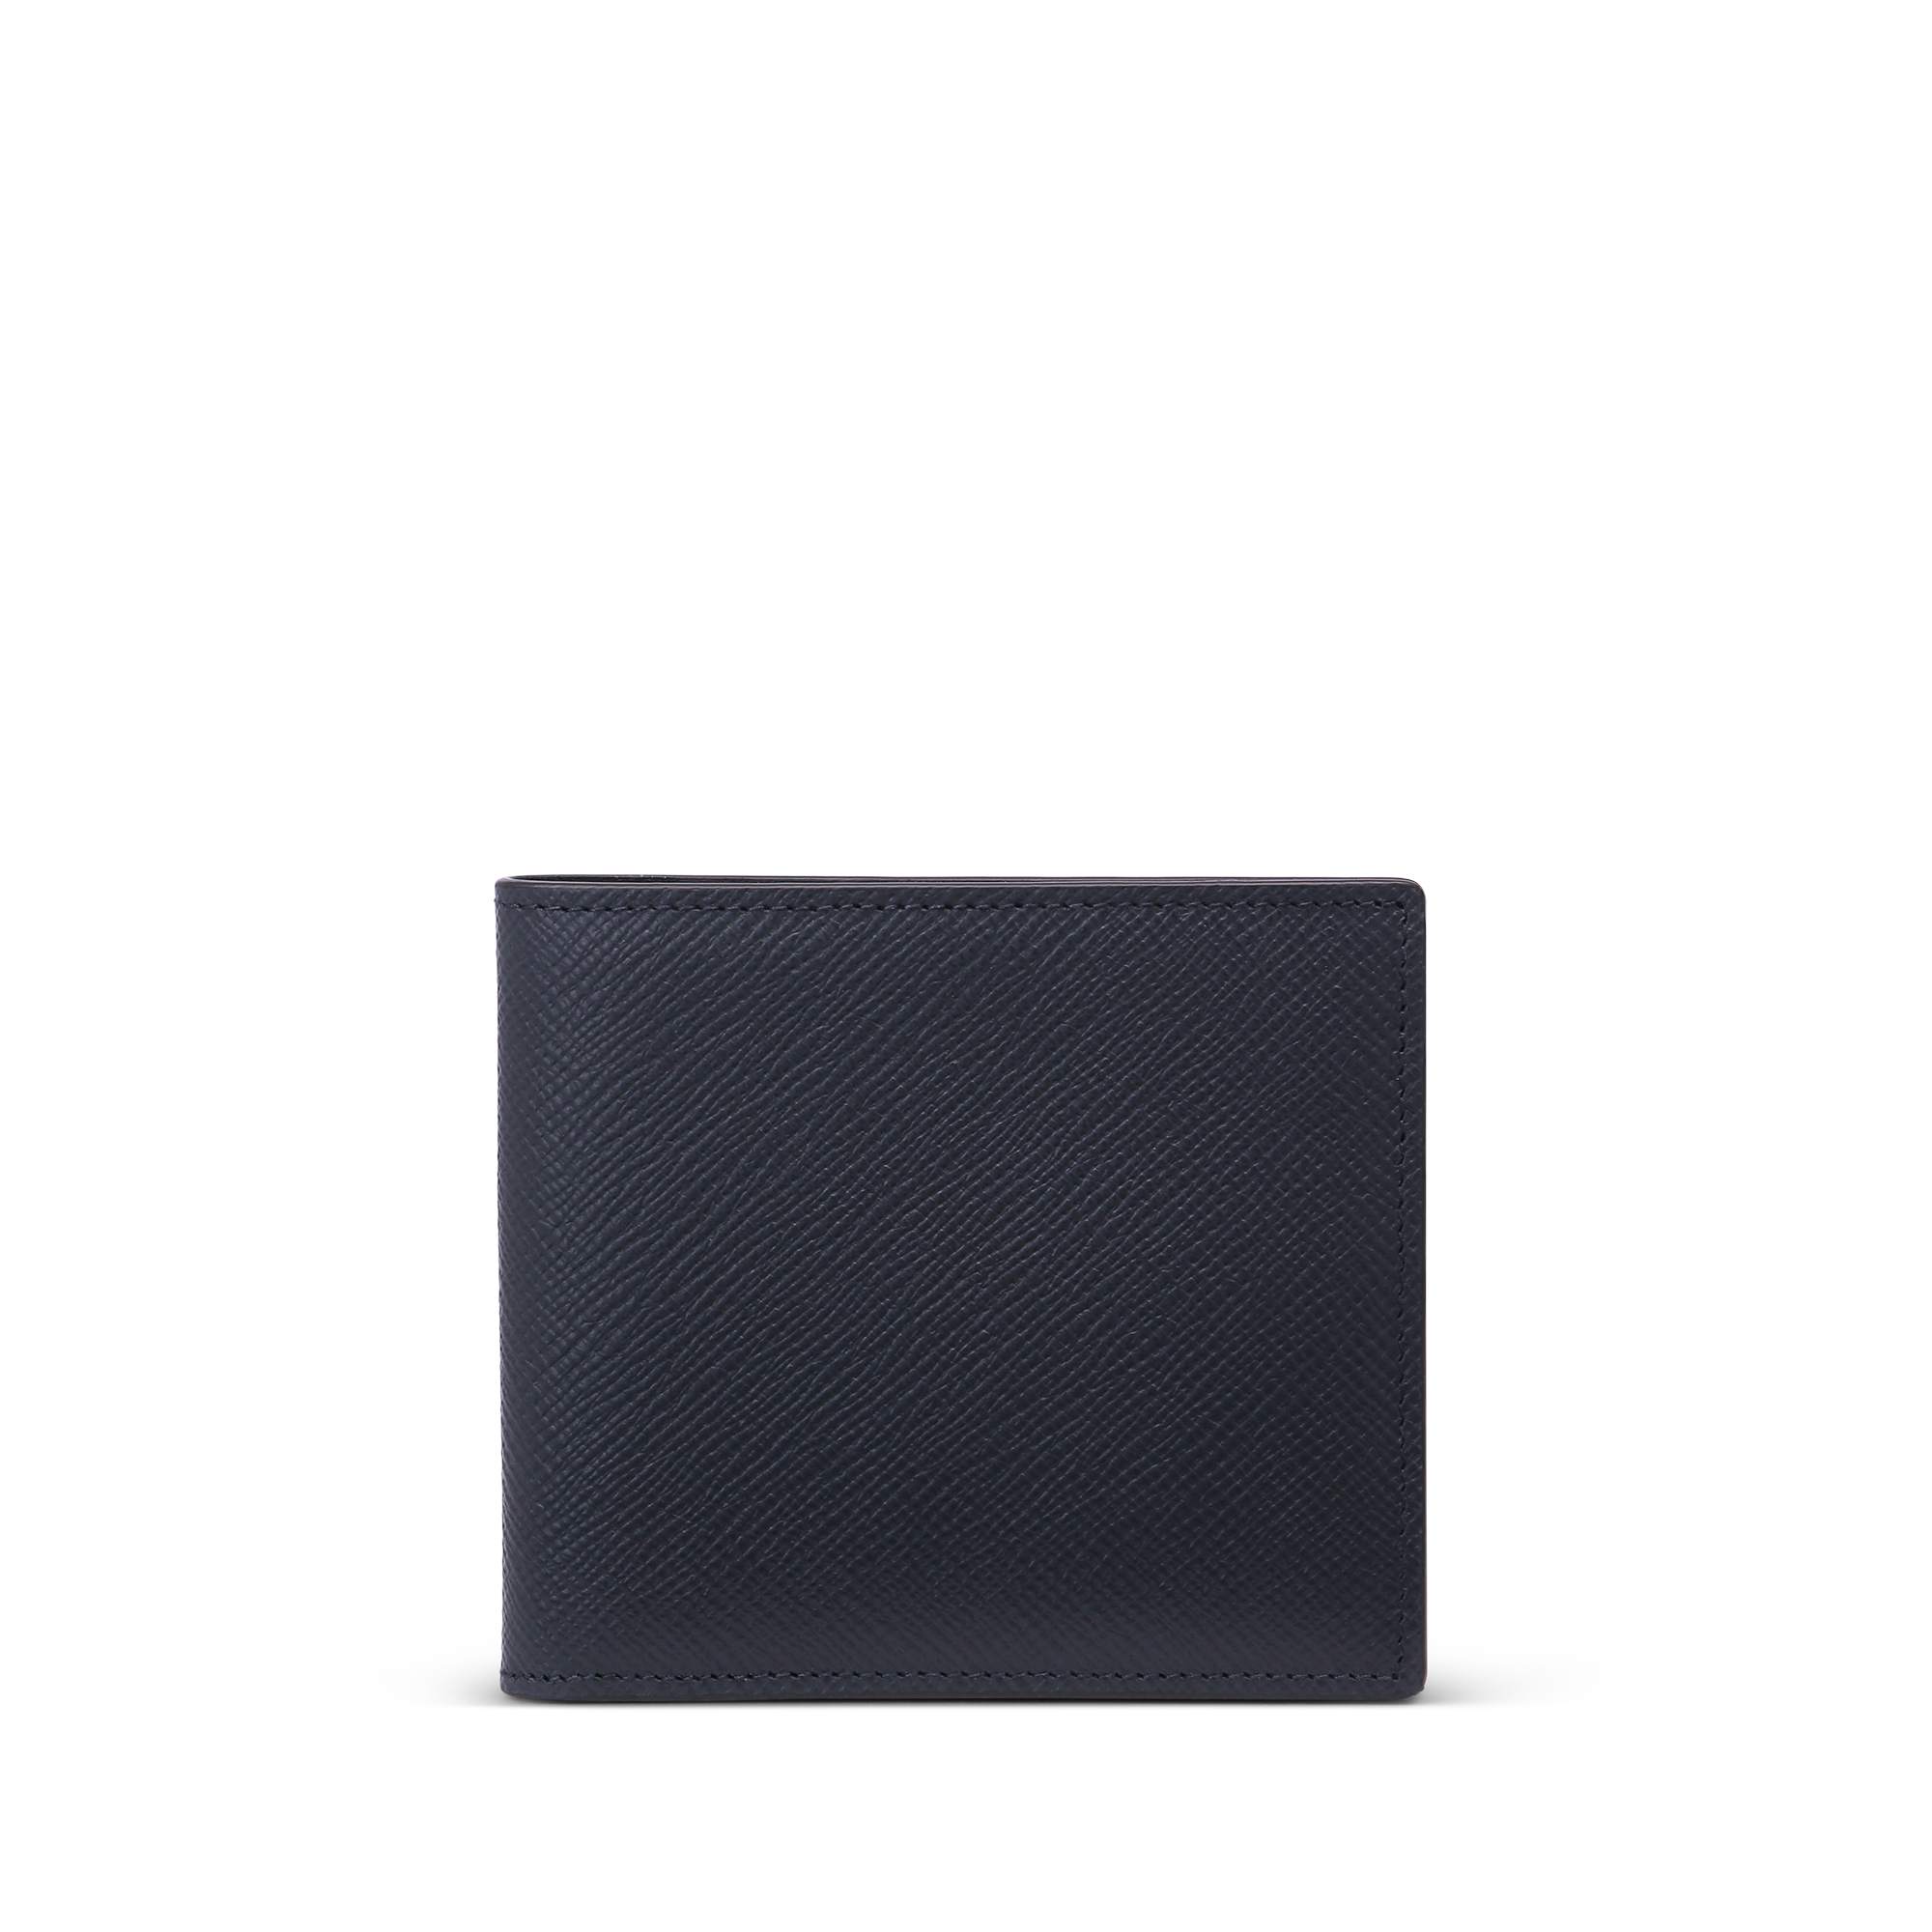 Smythson 6 Card Slot Wallet In Panama In Navy